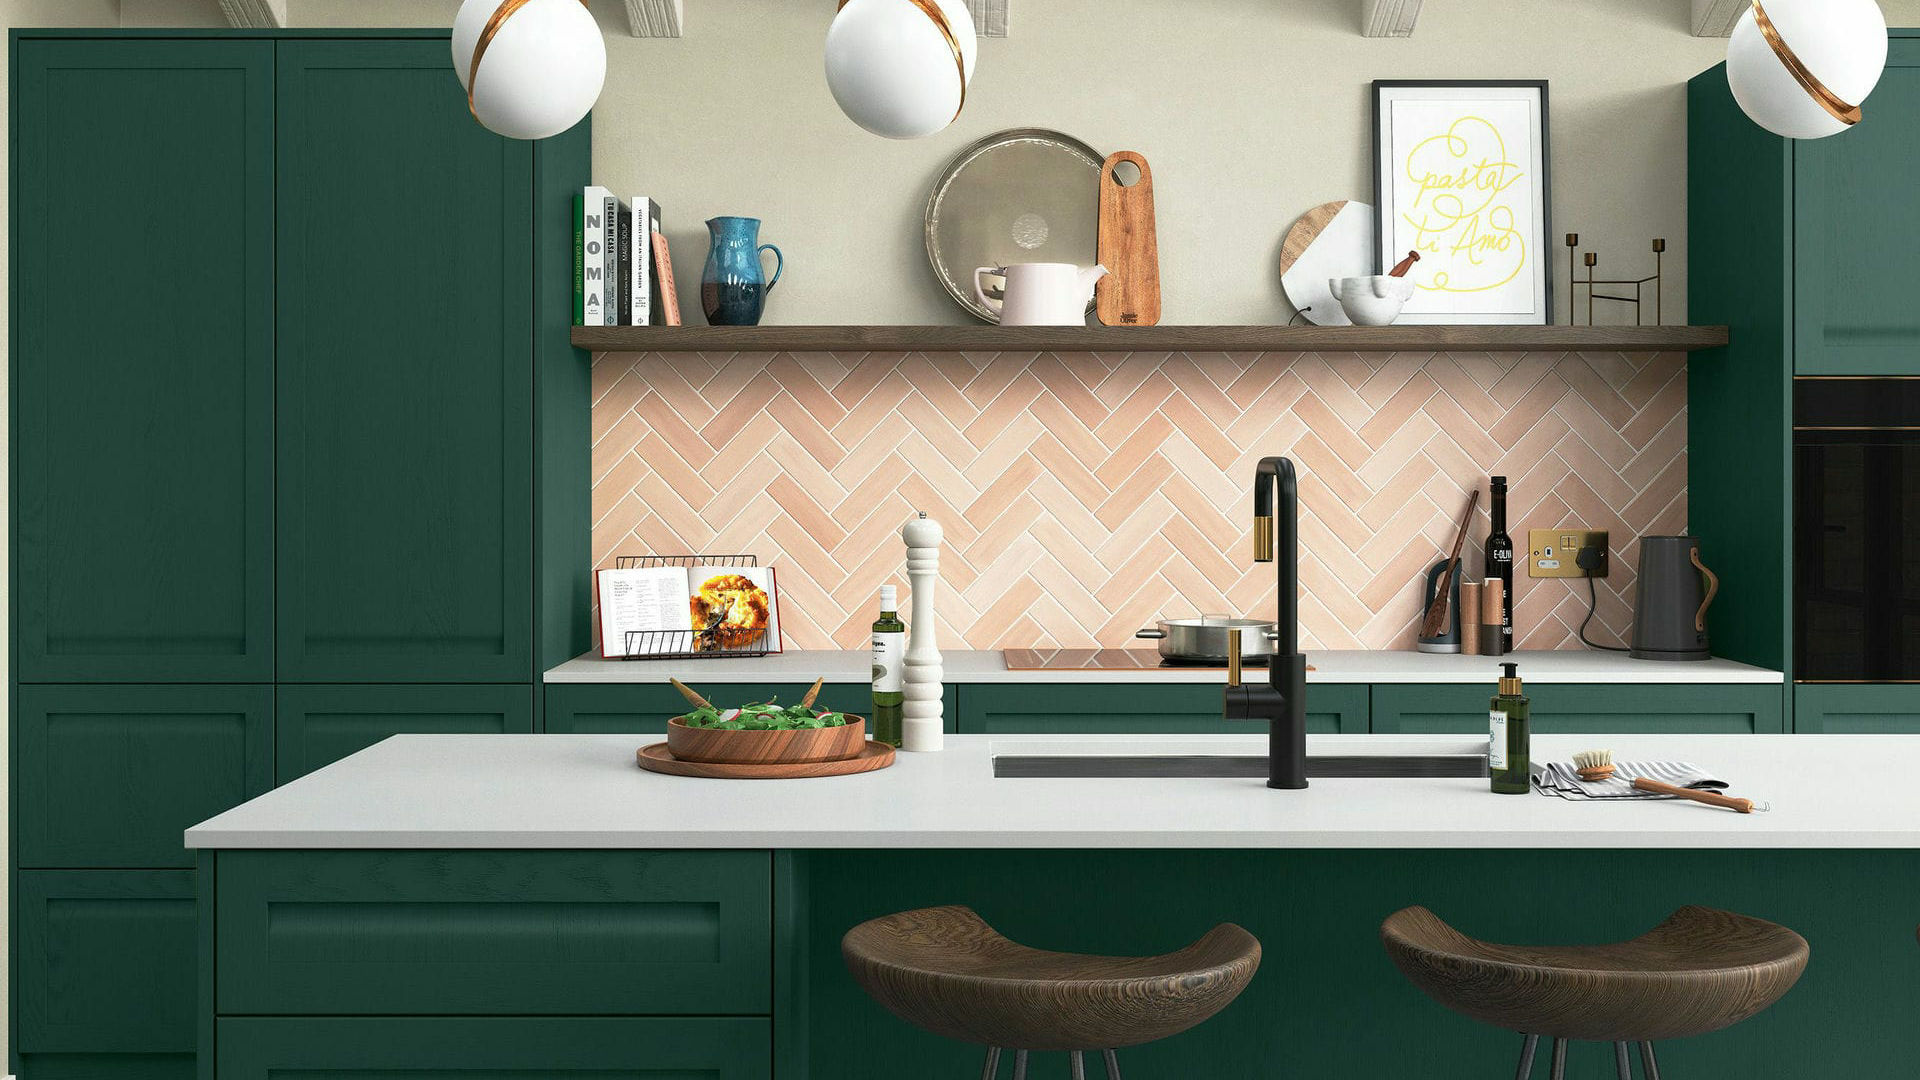 Handleless Solid Wood Heritage Green kitchens with a timeless color for a stately kitchen presence